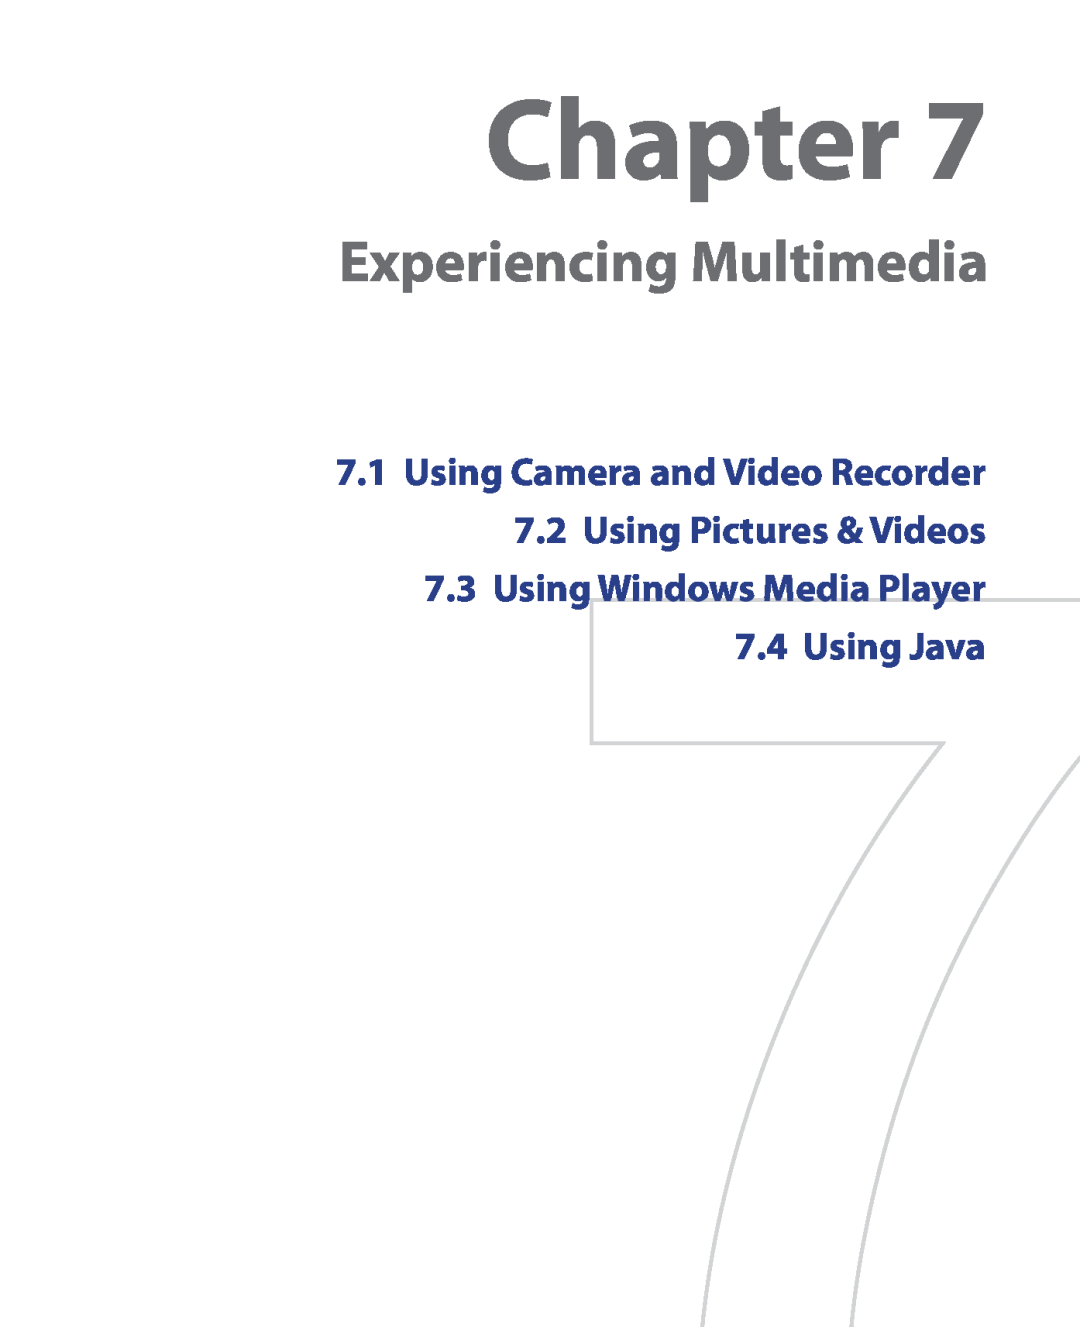 HTC HTC S621 user manual Experiencing Multimedia, Using Camera and Video Recorder 7.2 Using Pictures & Videos, Chapter 